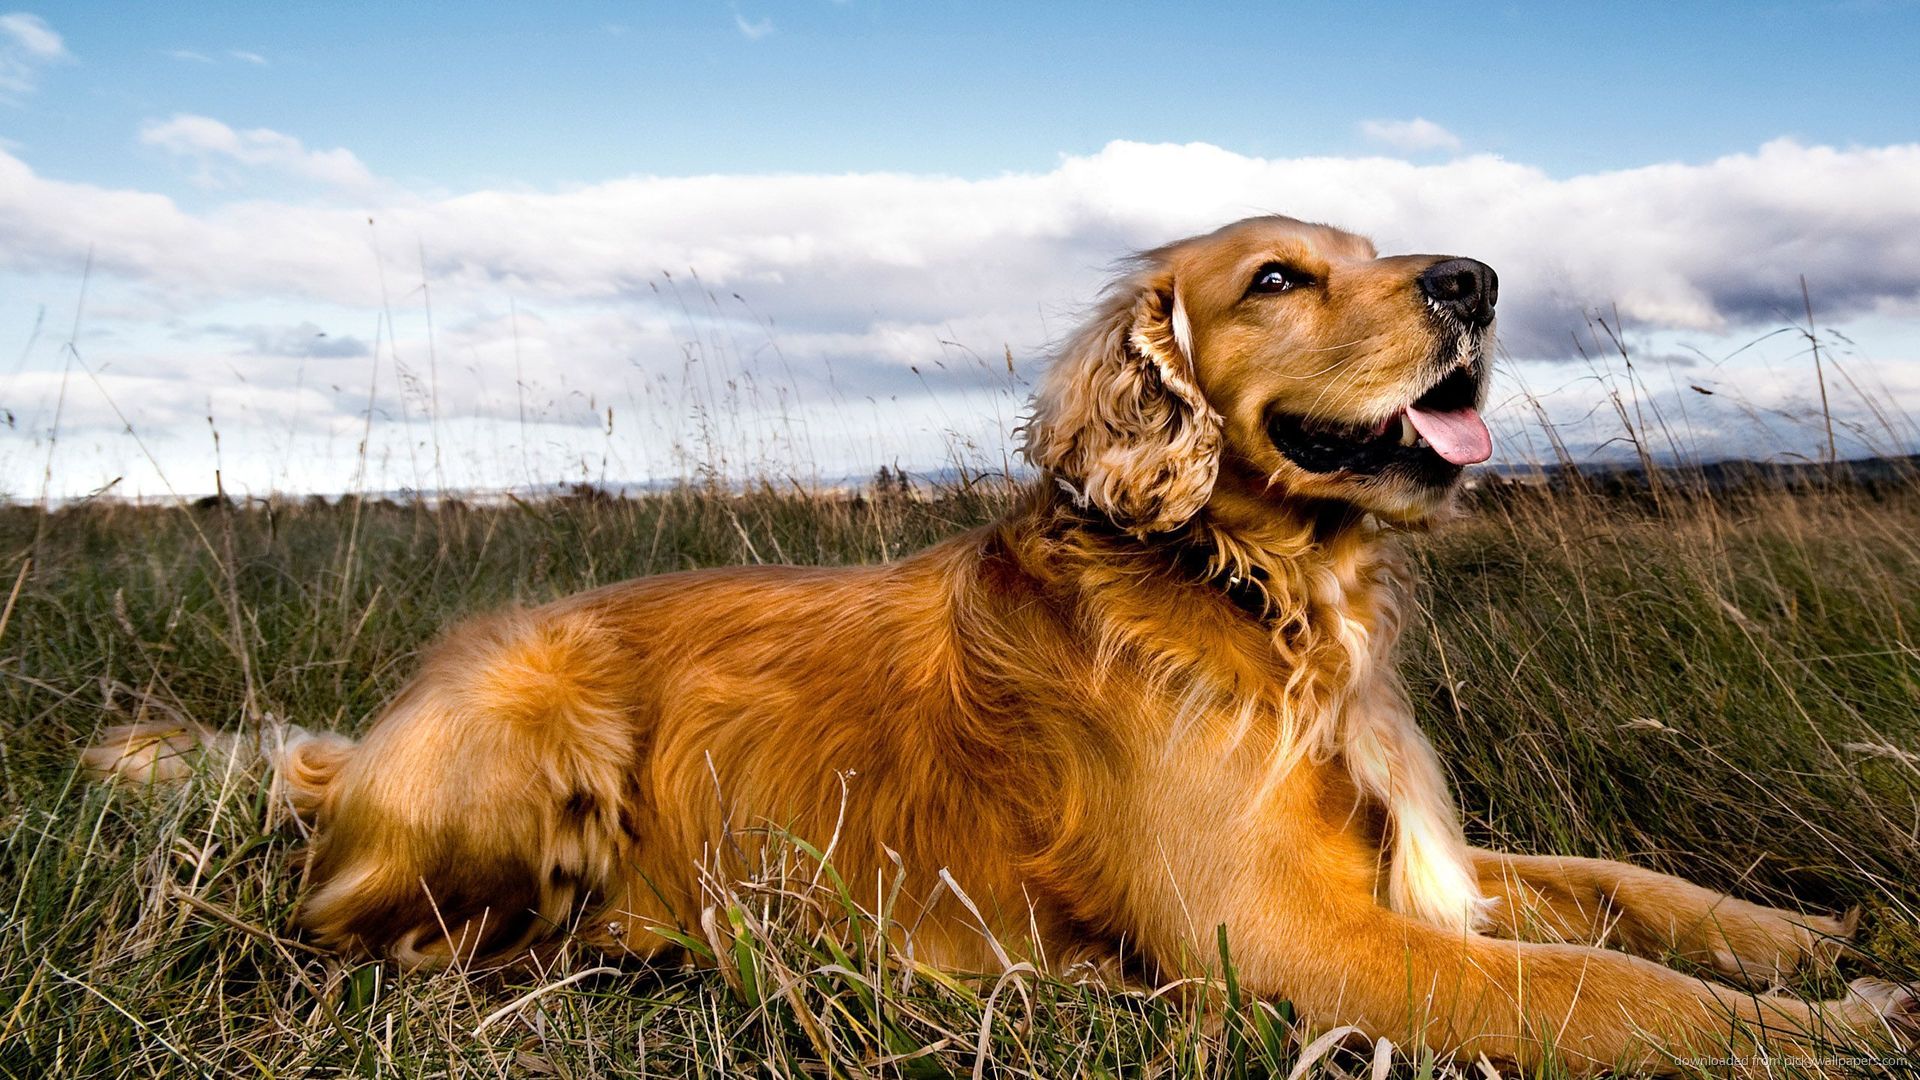 Golden Retriever Relaxing In A Field Wallpaper Screensaver For Kindle3